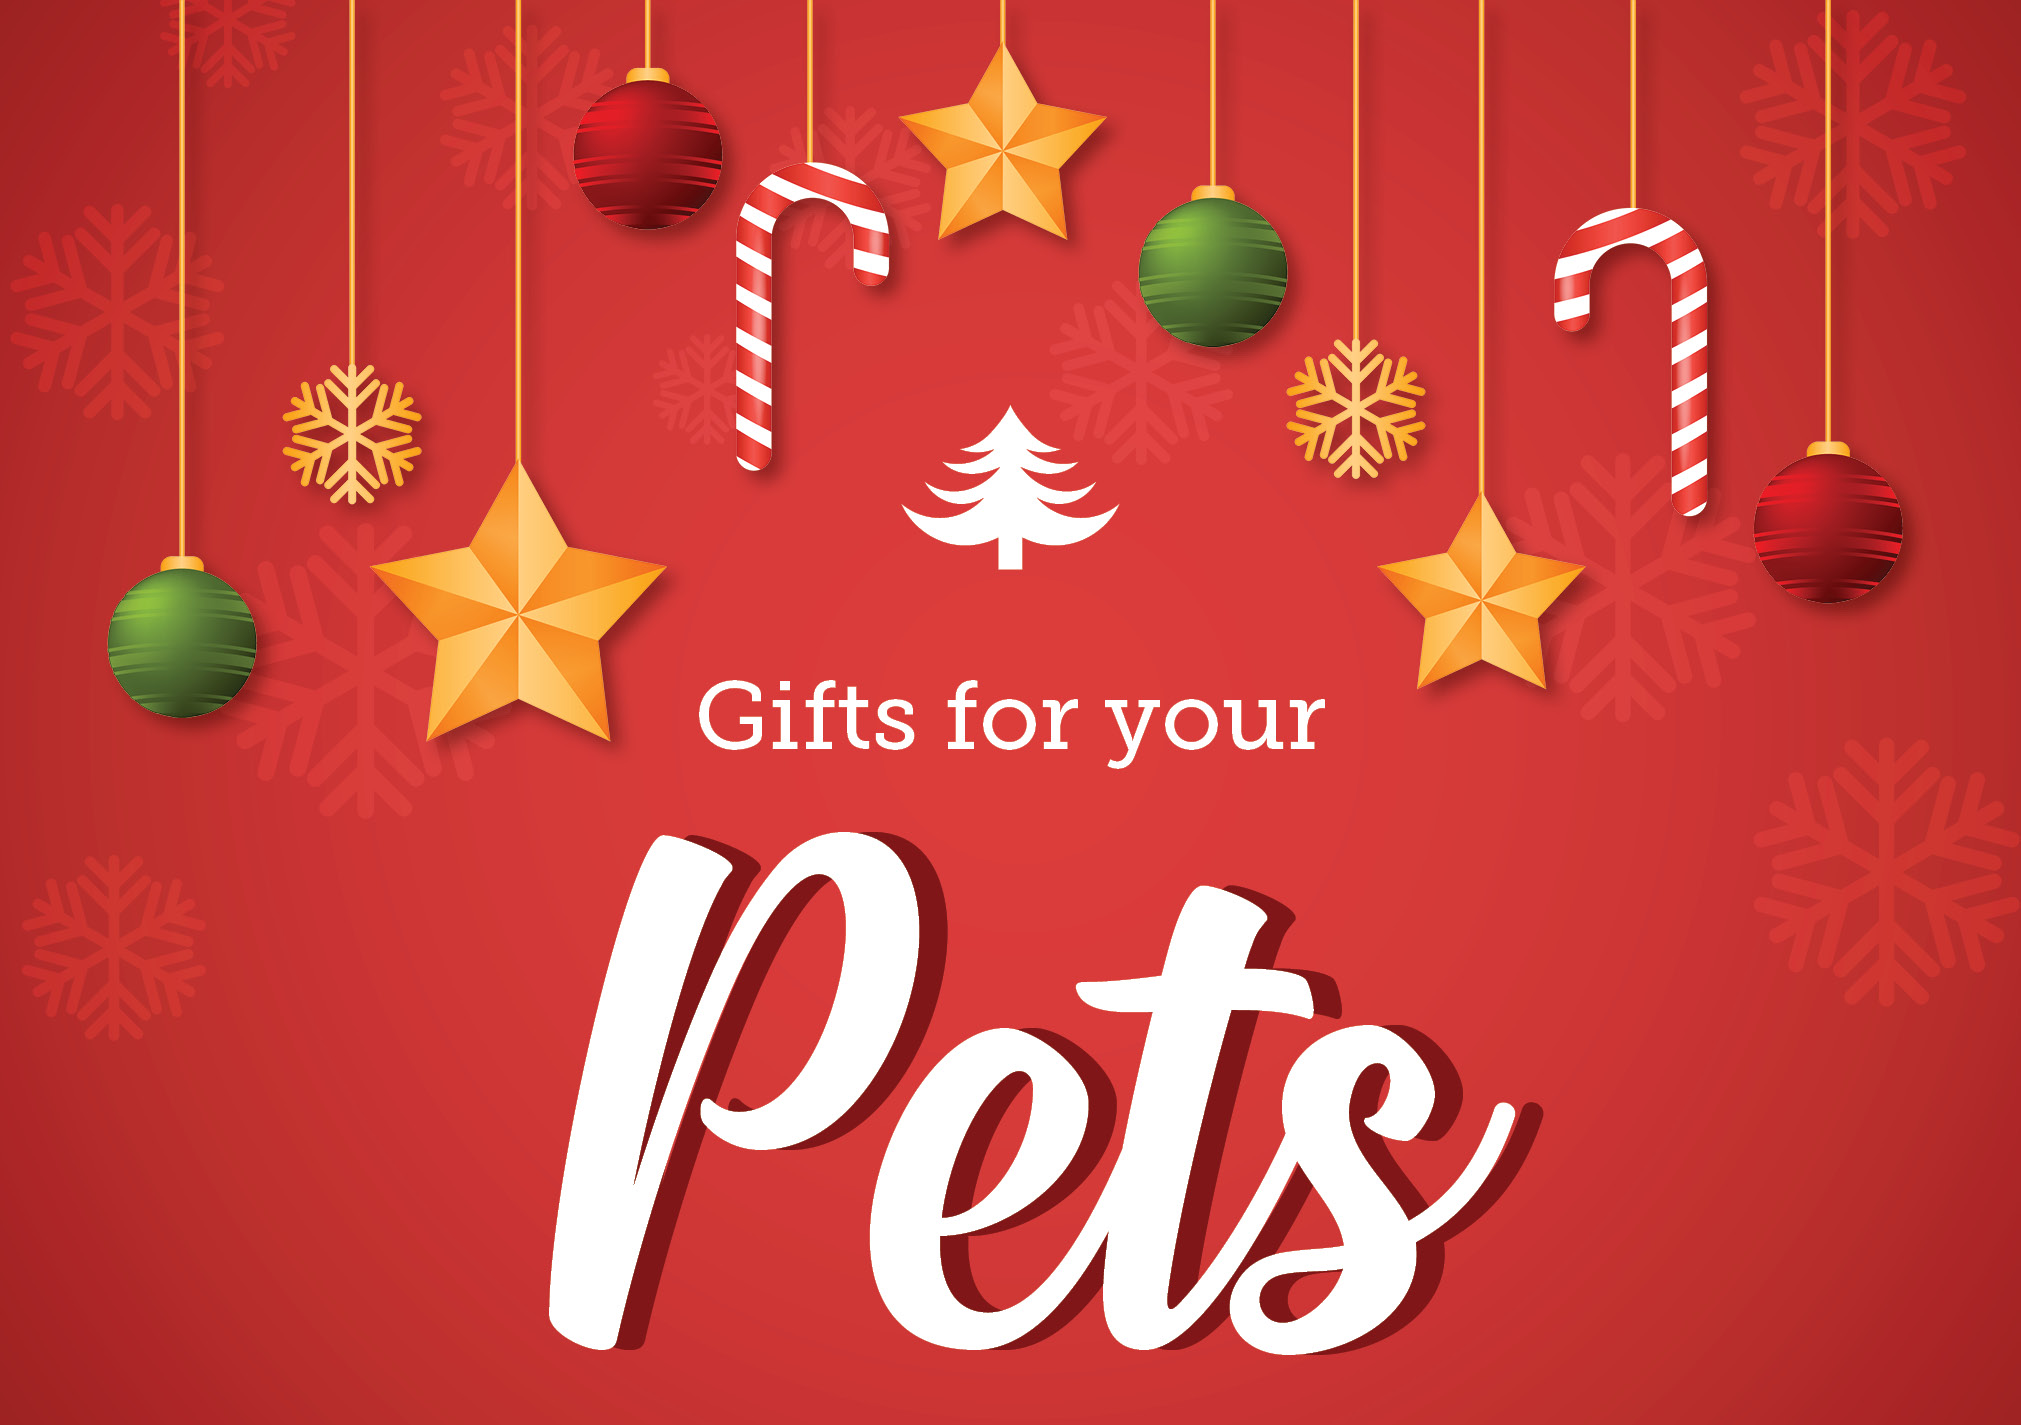 Gifts for your Pets